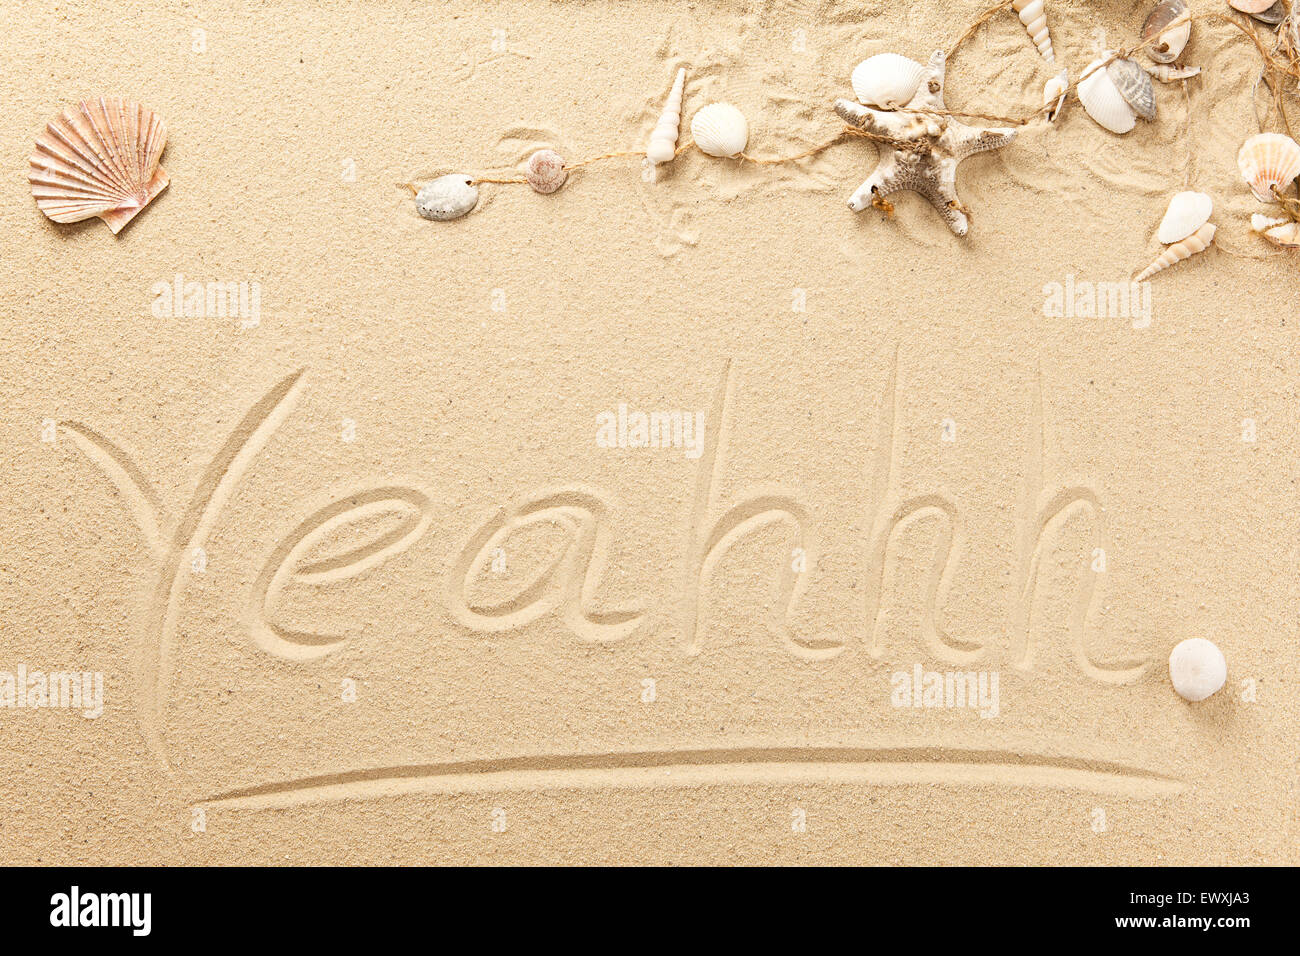 Shout of joy, posted the sand Stock Photo